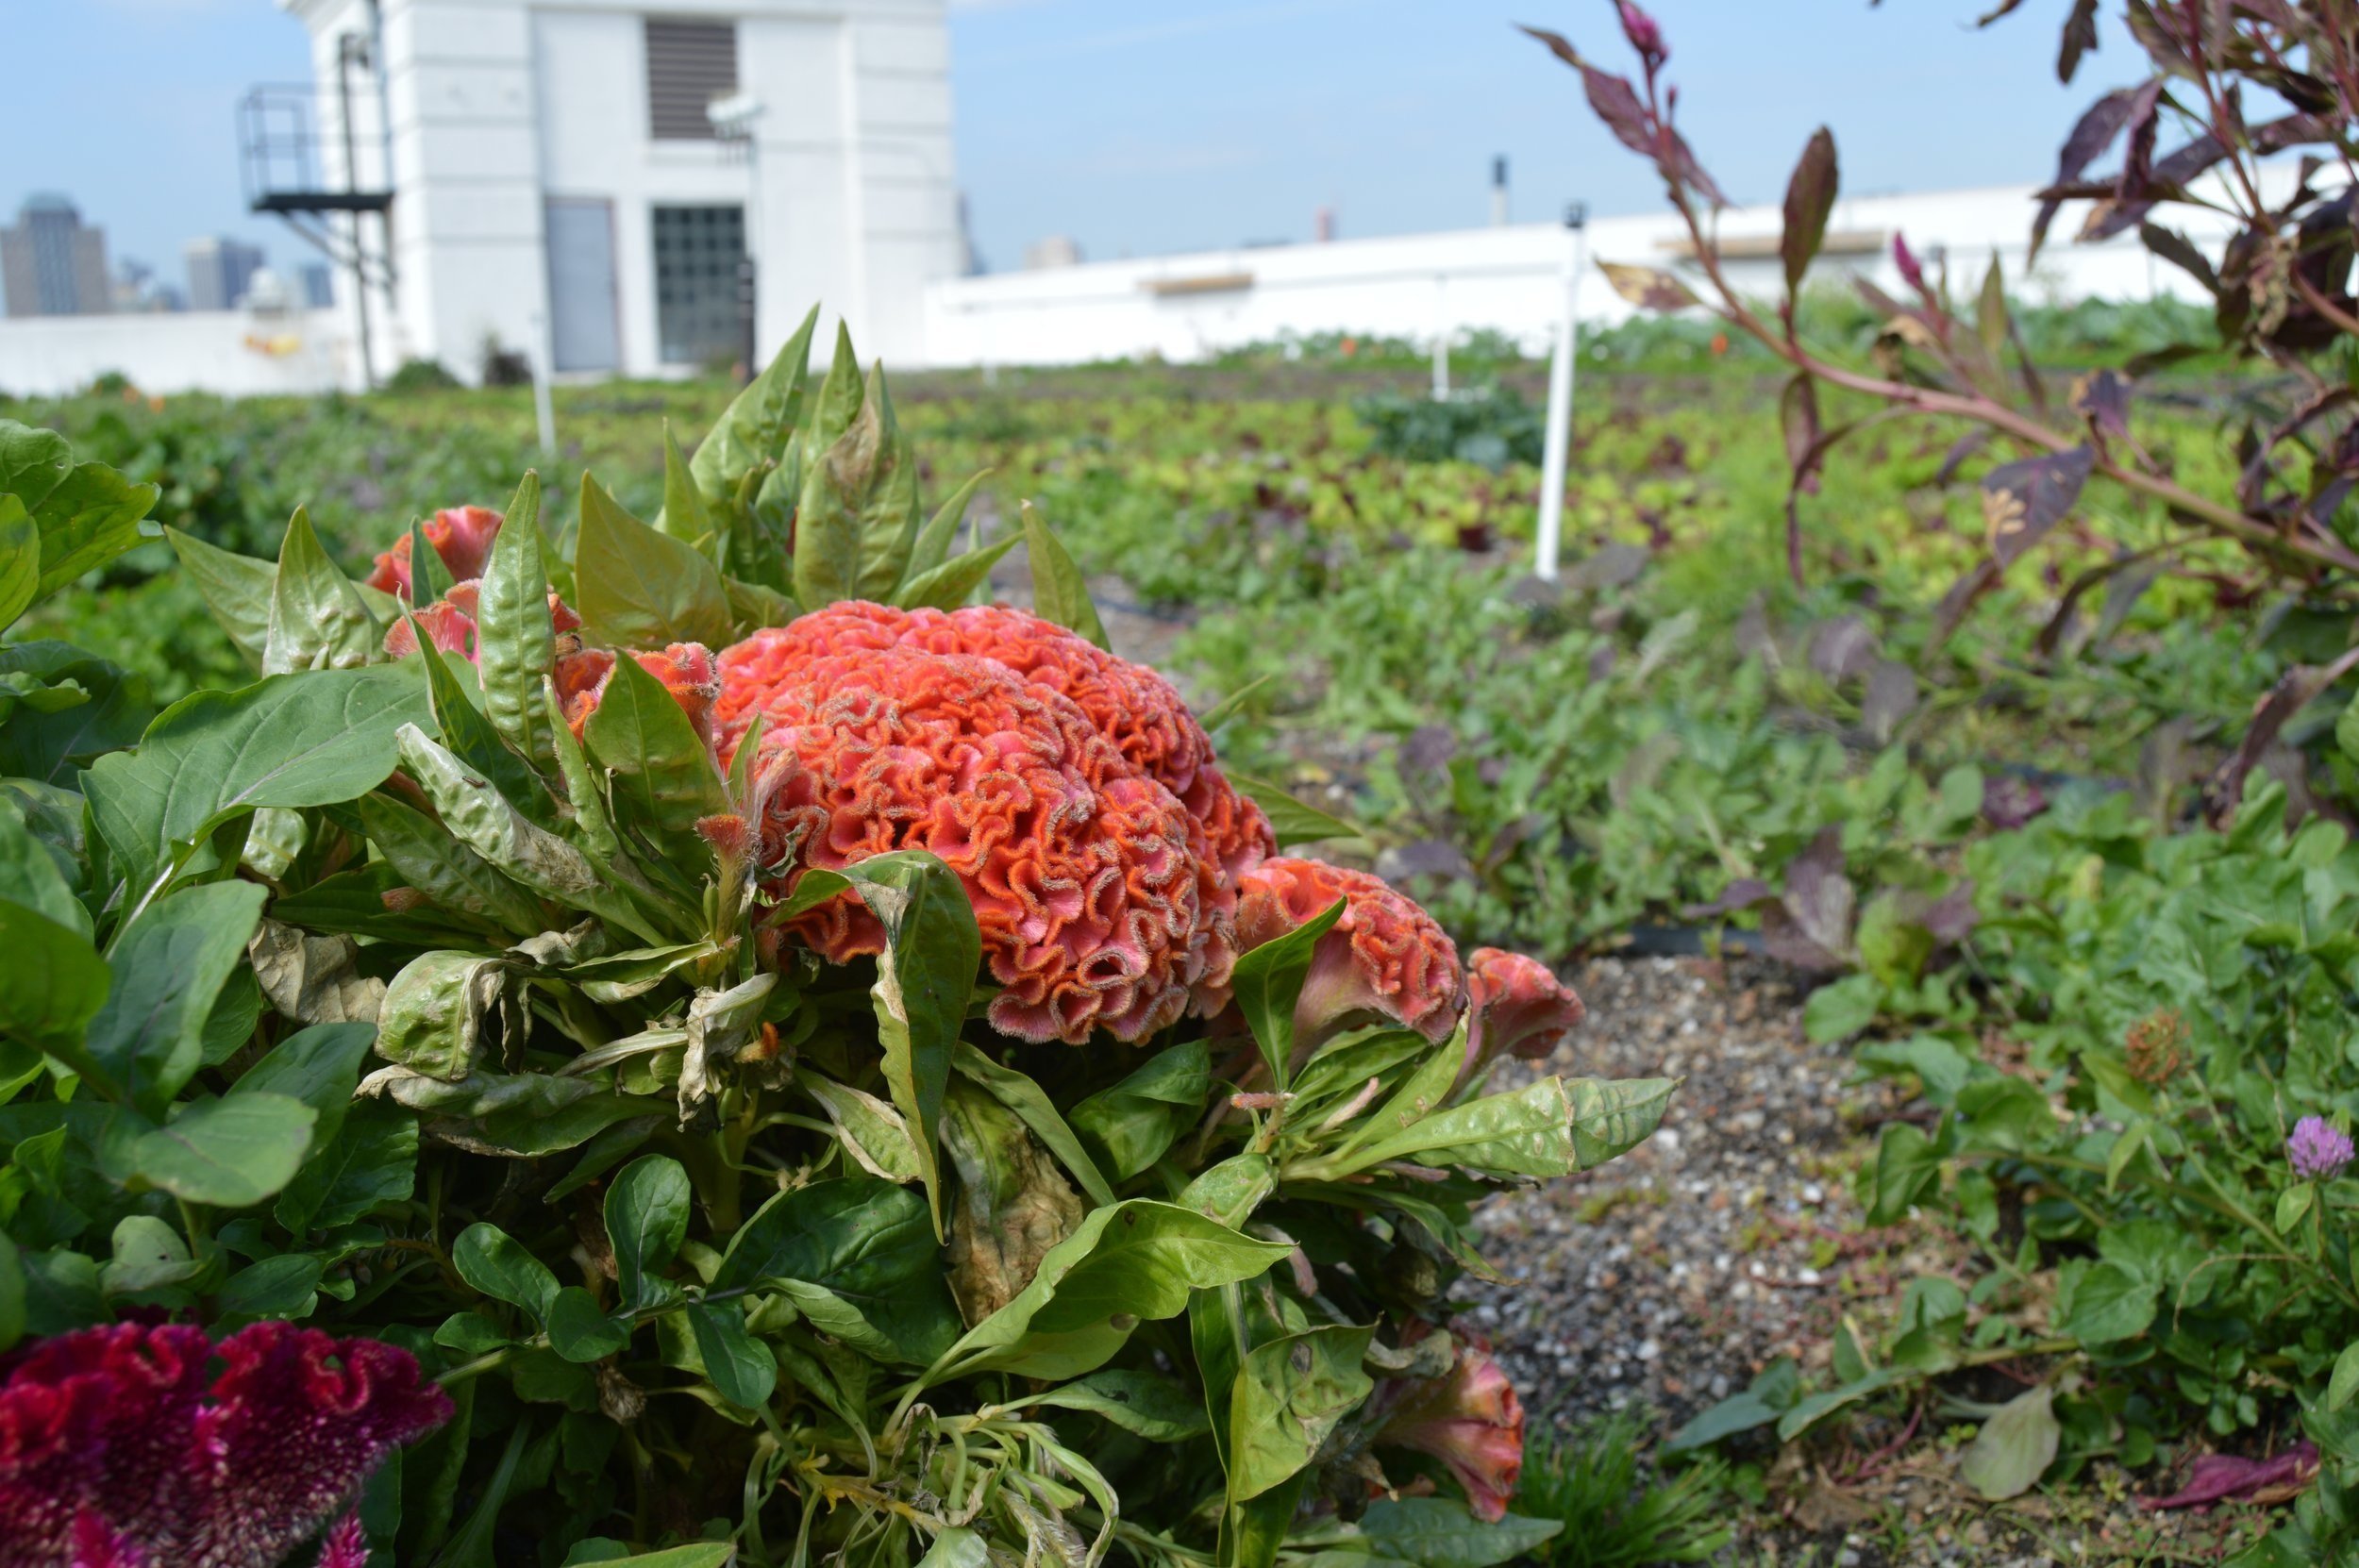 Pink Celosia at the Brooklyn Grange Farm at the Navy Yard. Photo: rooflite